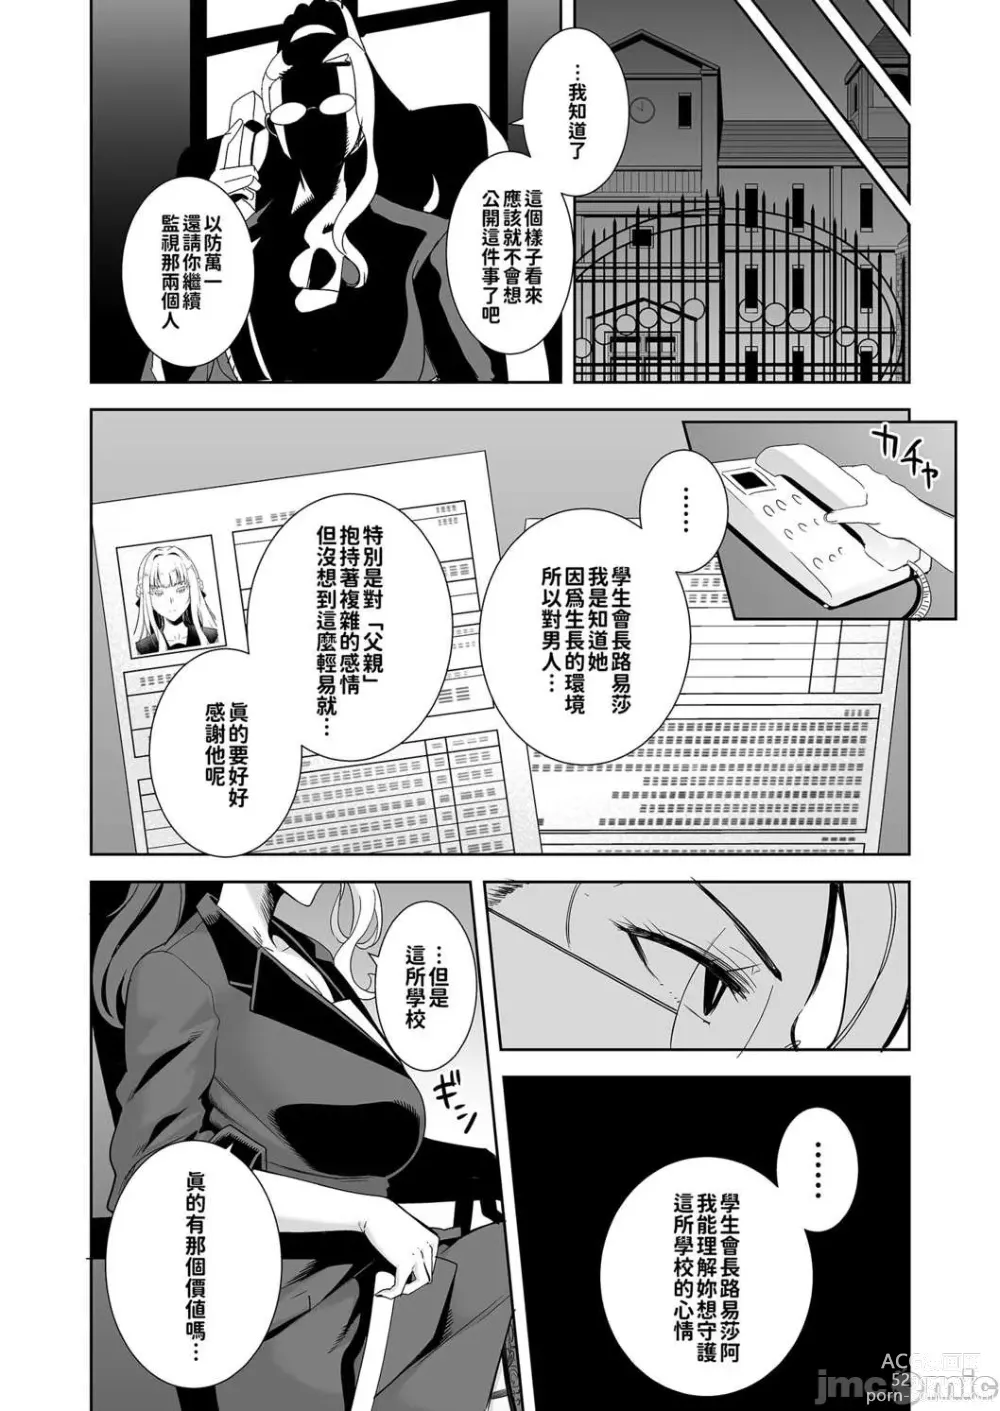 Page 44 of doujinshi 聖華女学院高等部公認竿おじさん 4